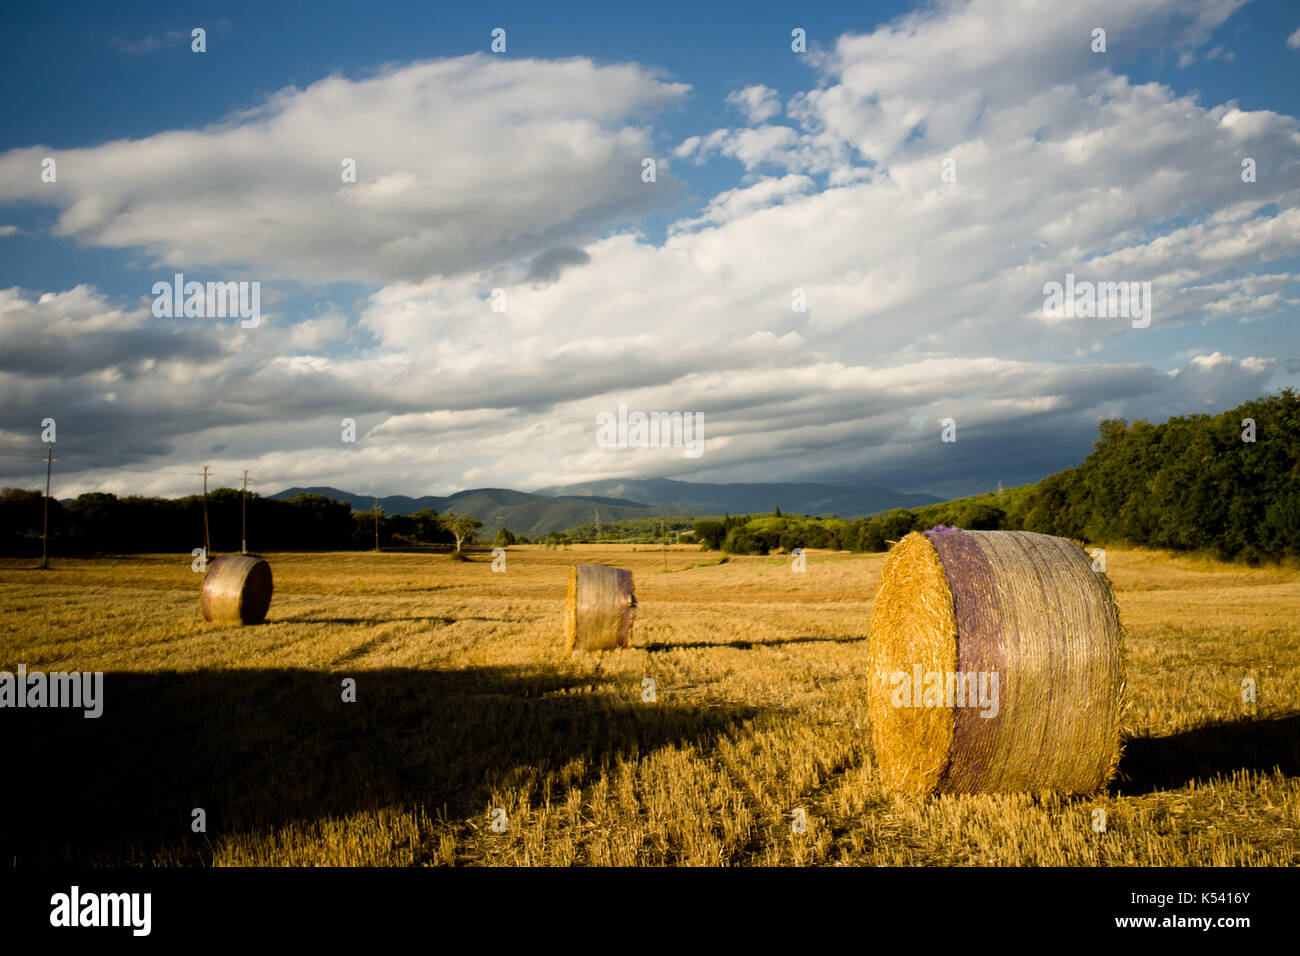 Rural scene in a harvested wheat field Stock Photo